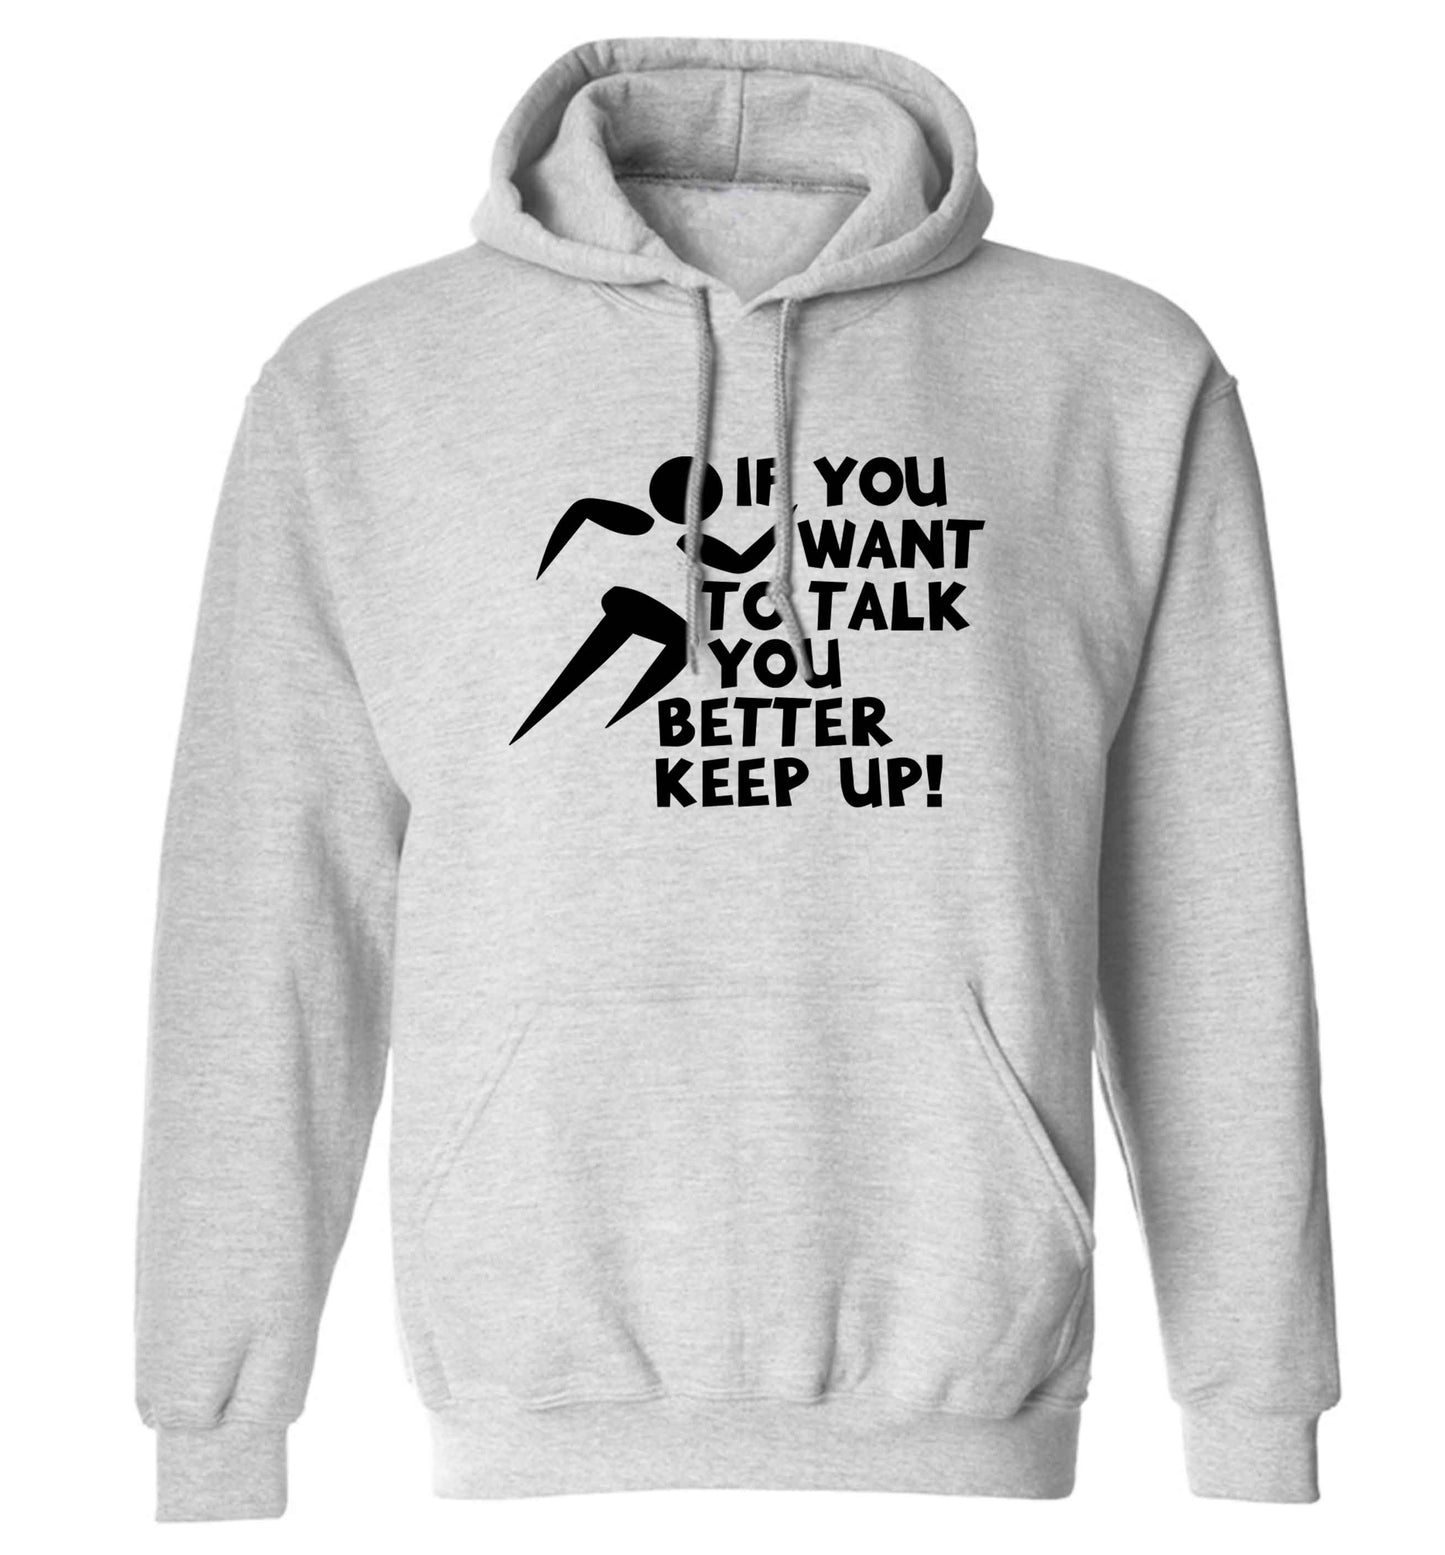 If you want to talk you better keep up! adults unisex grey hoodie 2XL